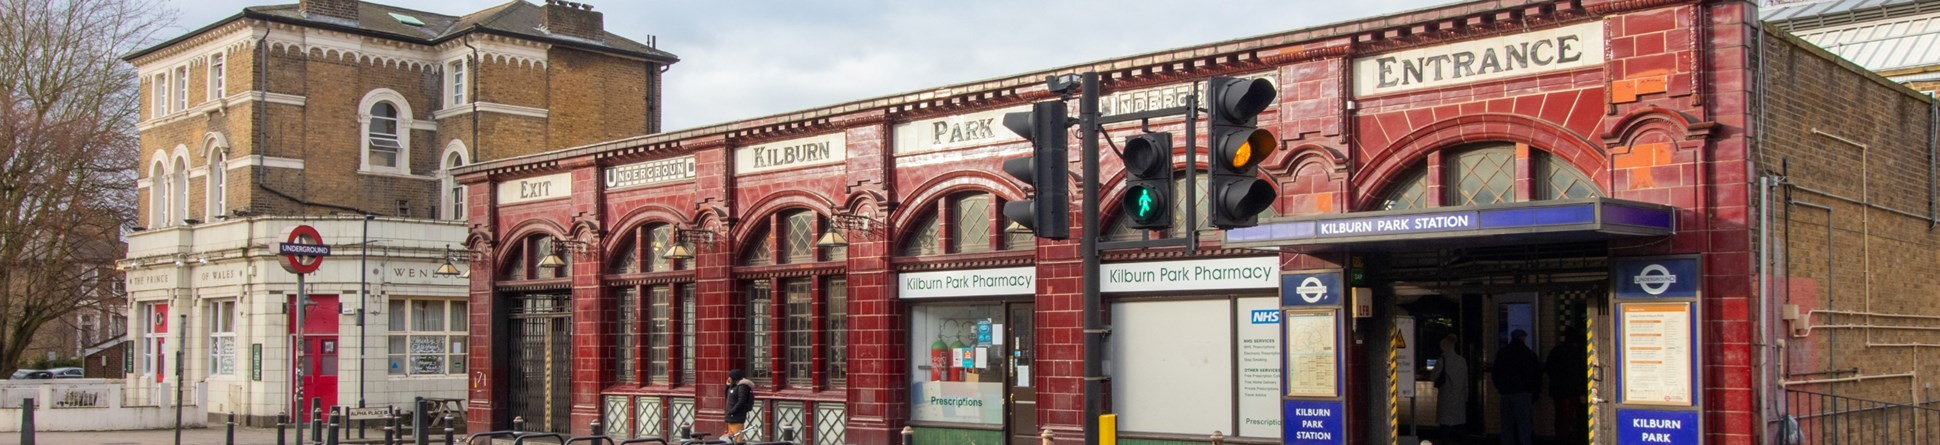 Red tiled tube station. Signs along the top of the building read (left to right):
Exit; Underground; Kilburn; Park; Underground; Entrance.